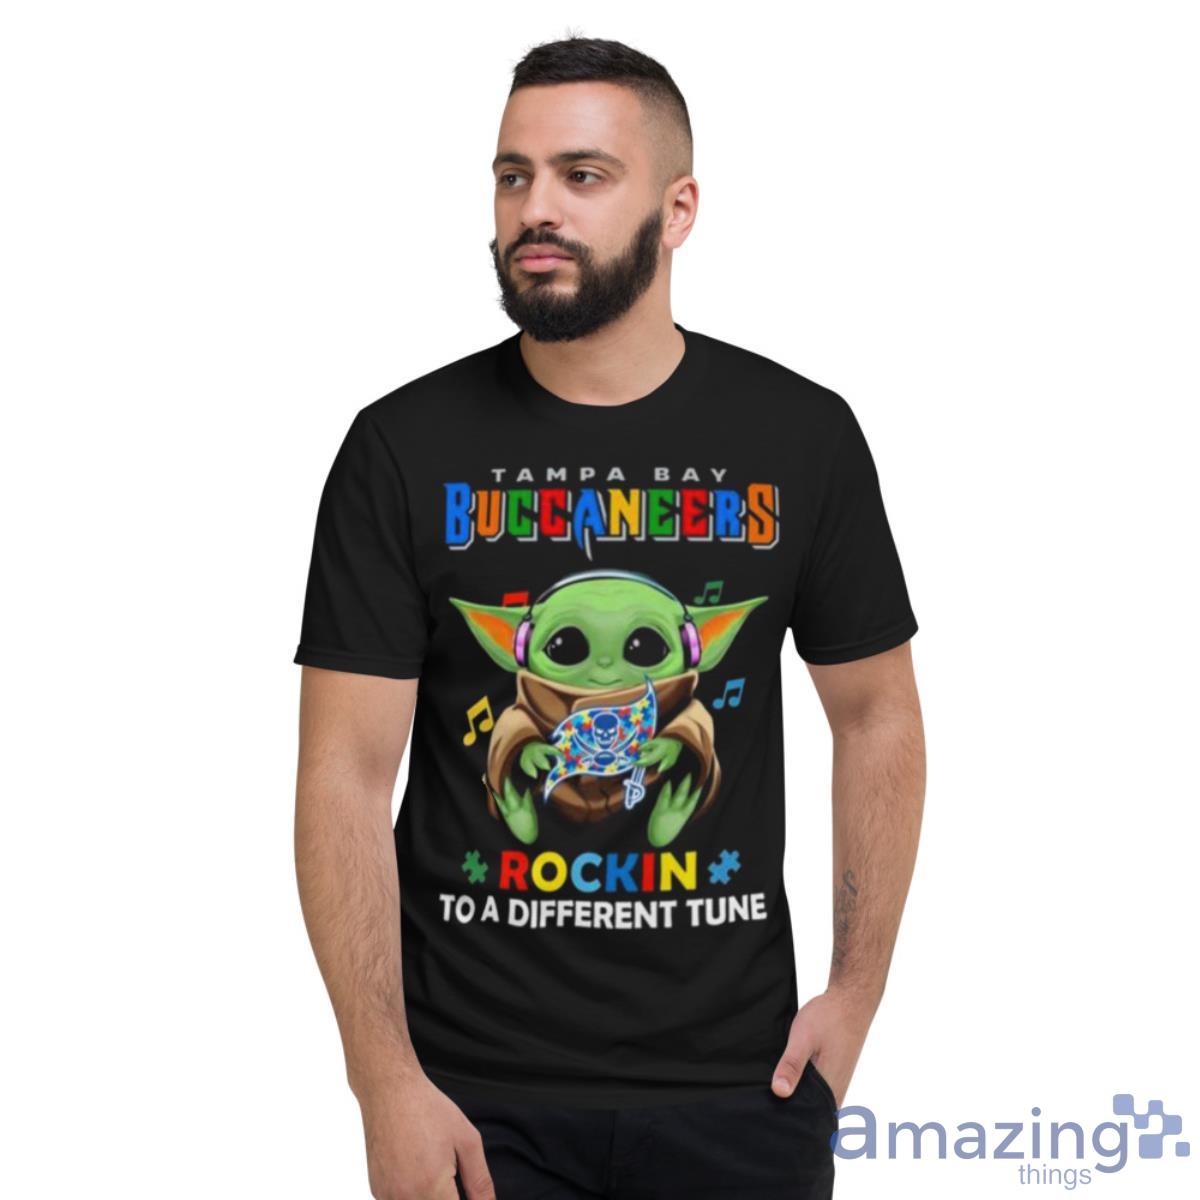 Baby Yoda Hug Tampa Bay Buccaneers Autism Rockin To A Different Tune Shirt - Short Sleeve T-Shirt